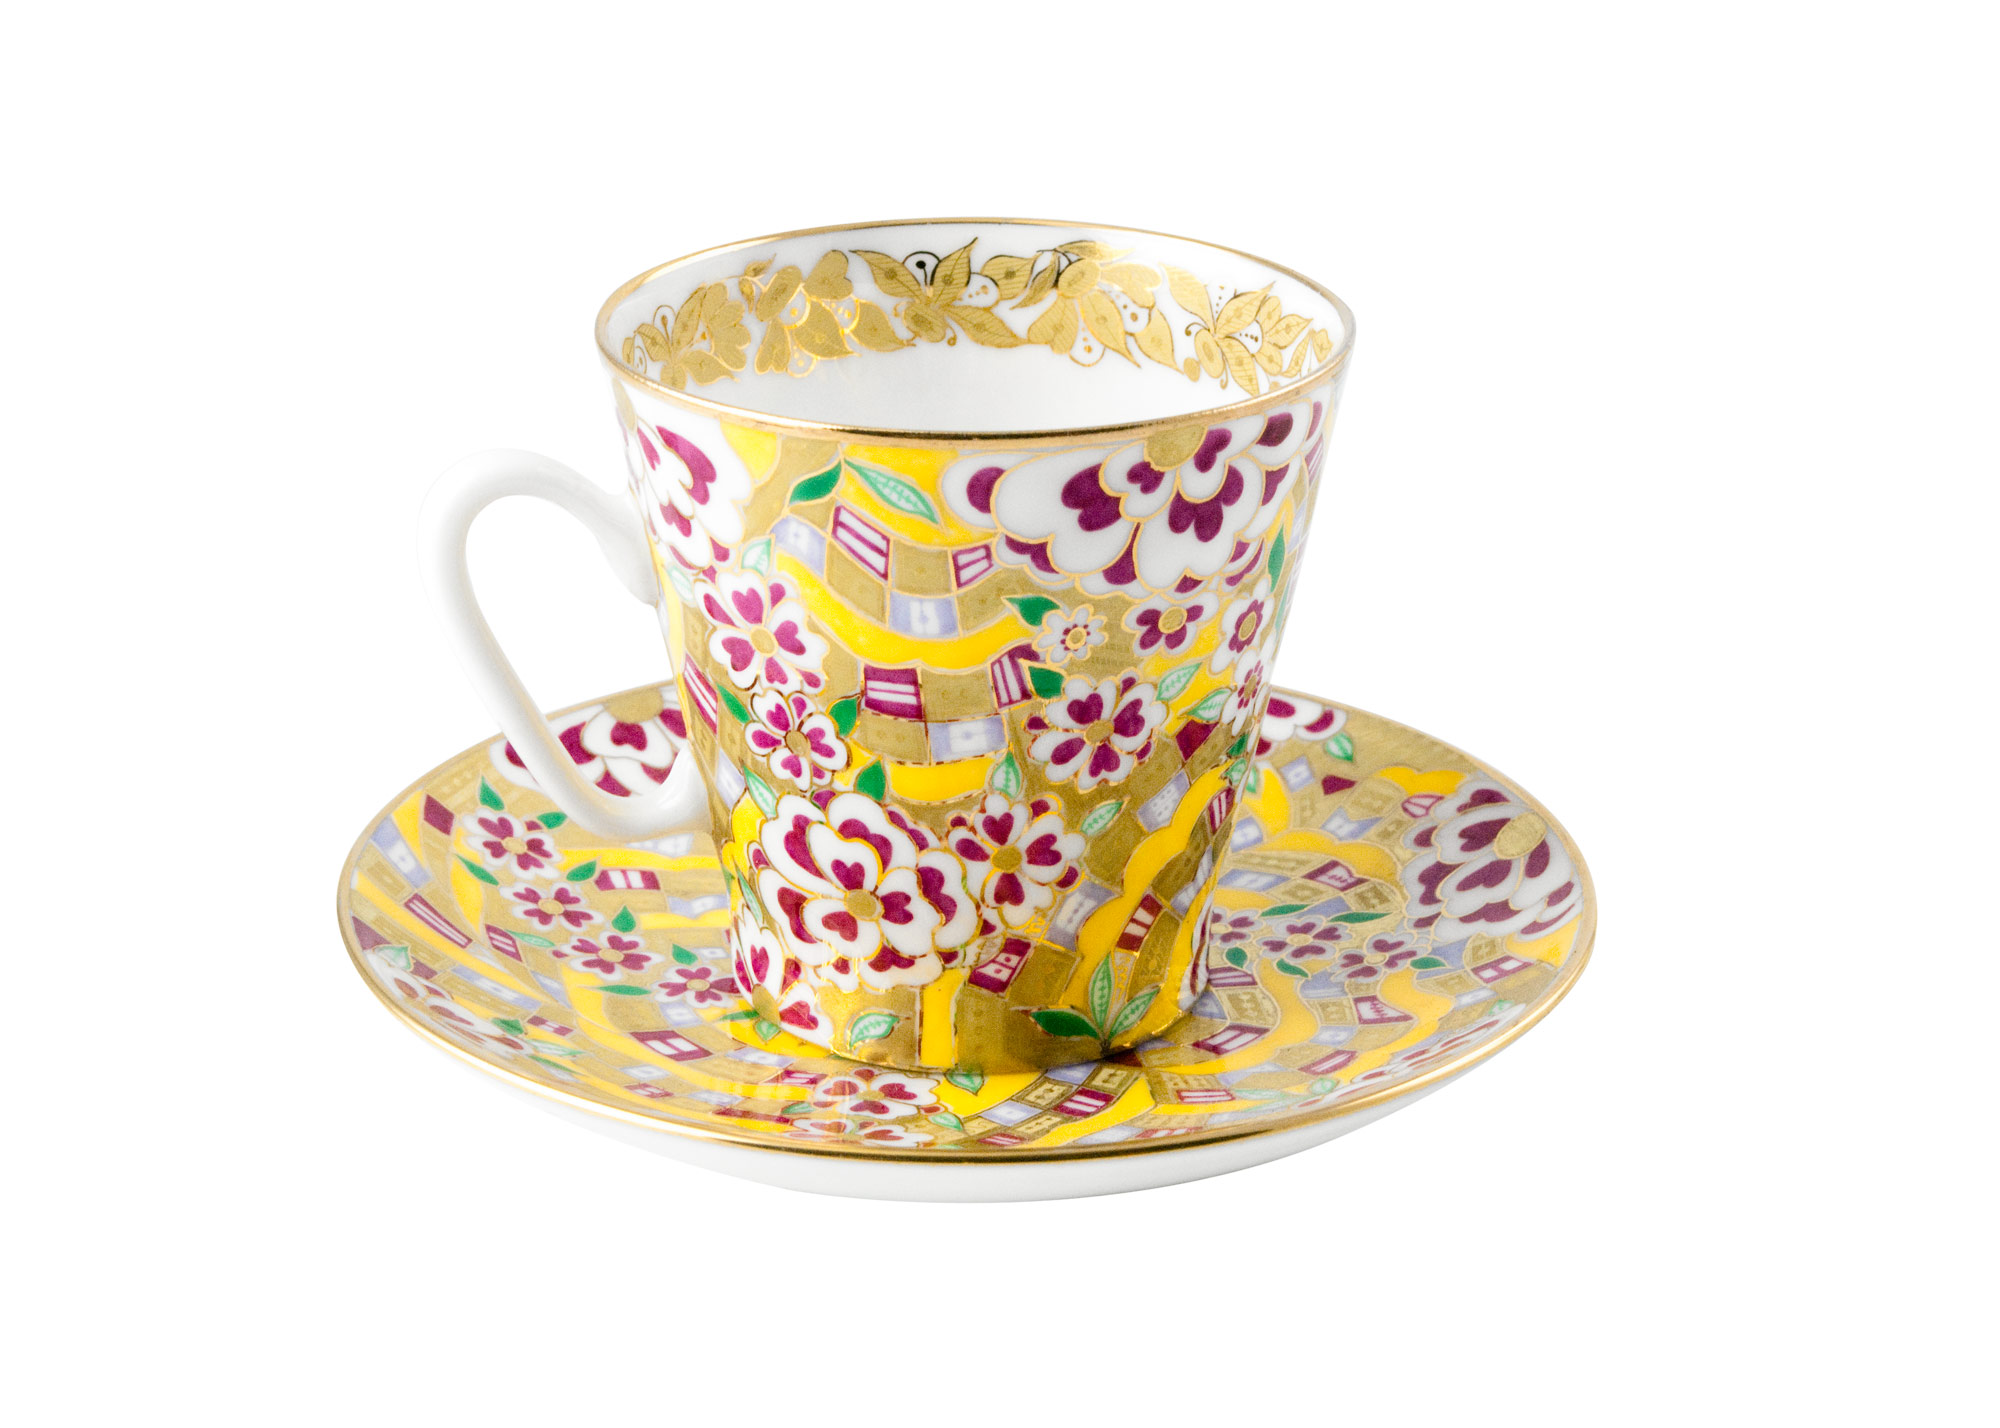 Buy White Flowers Cup and Saucer, bone, Black Coffee Shape at GoldenCockerel.com